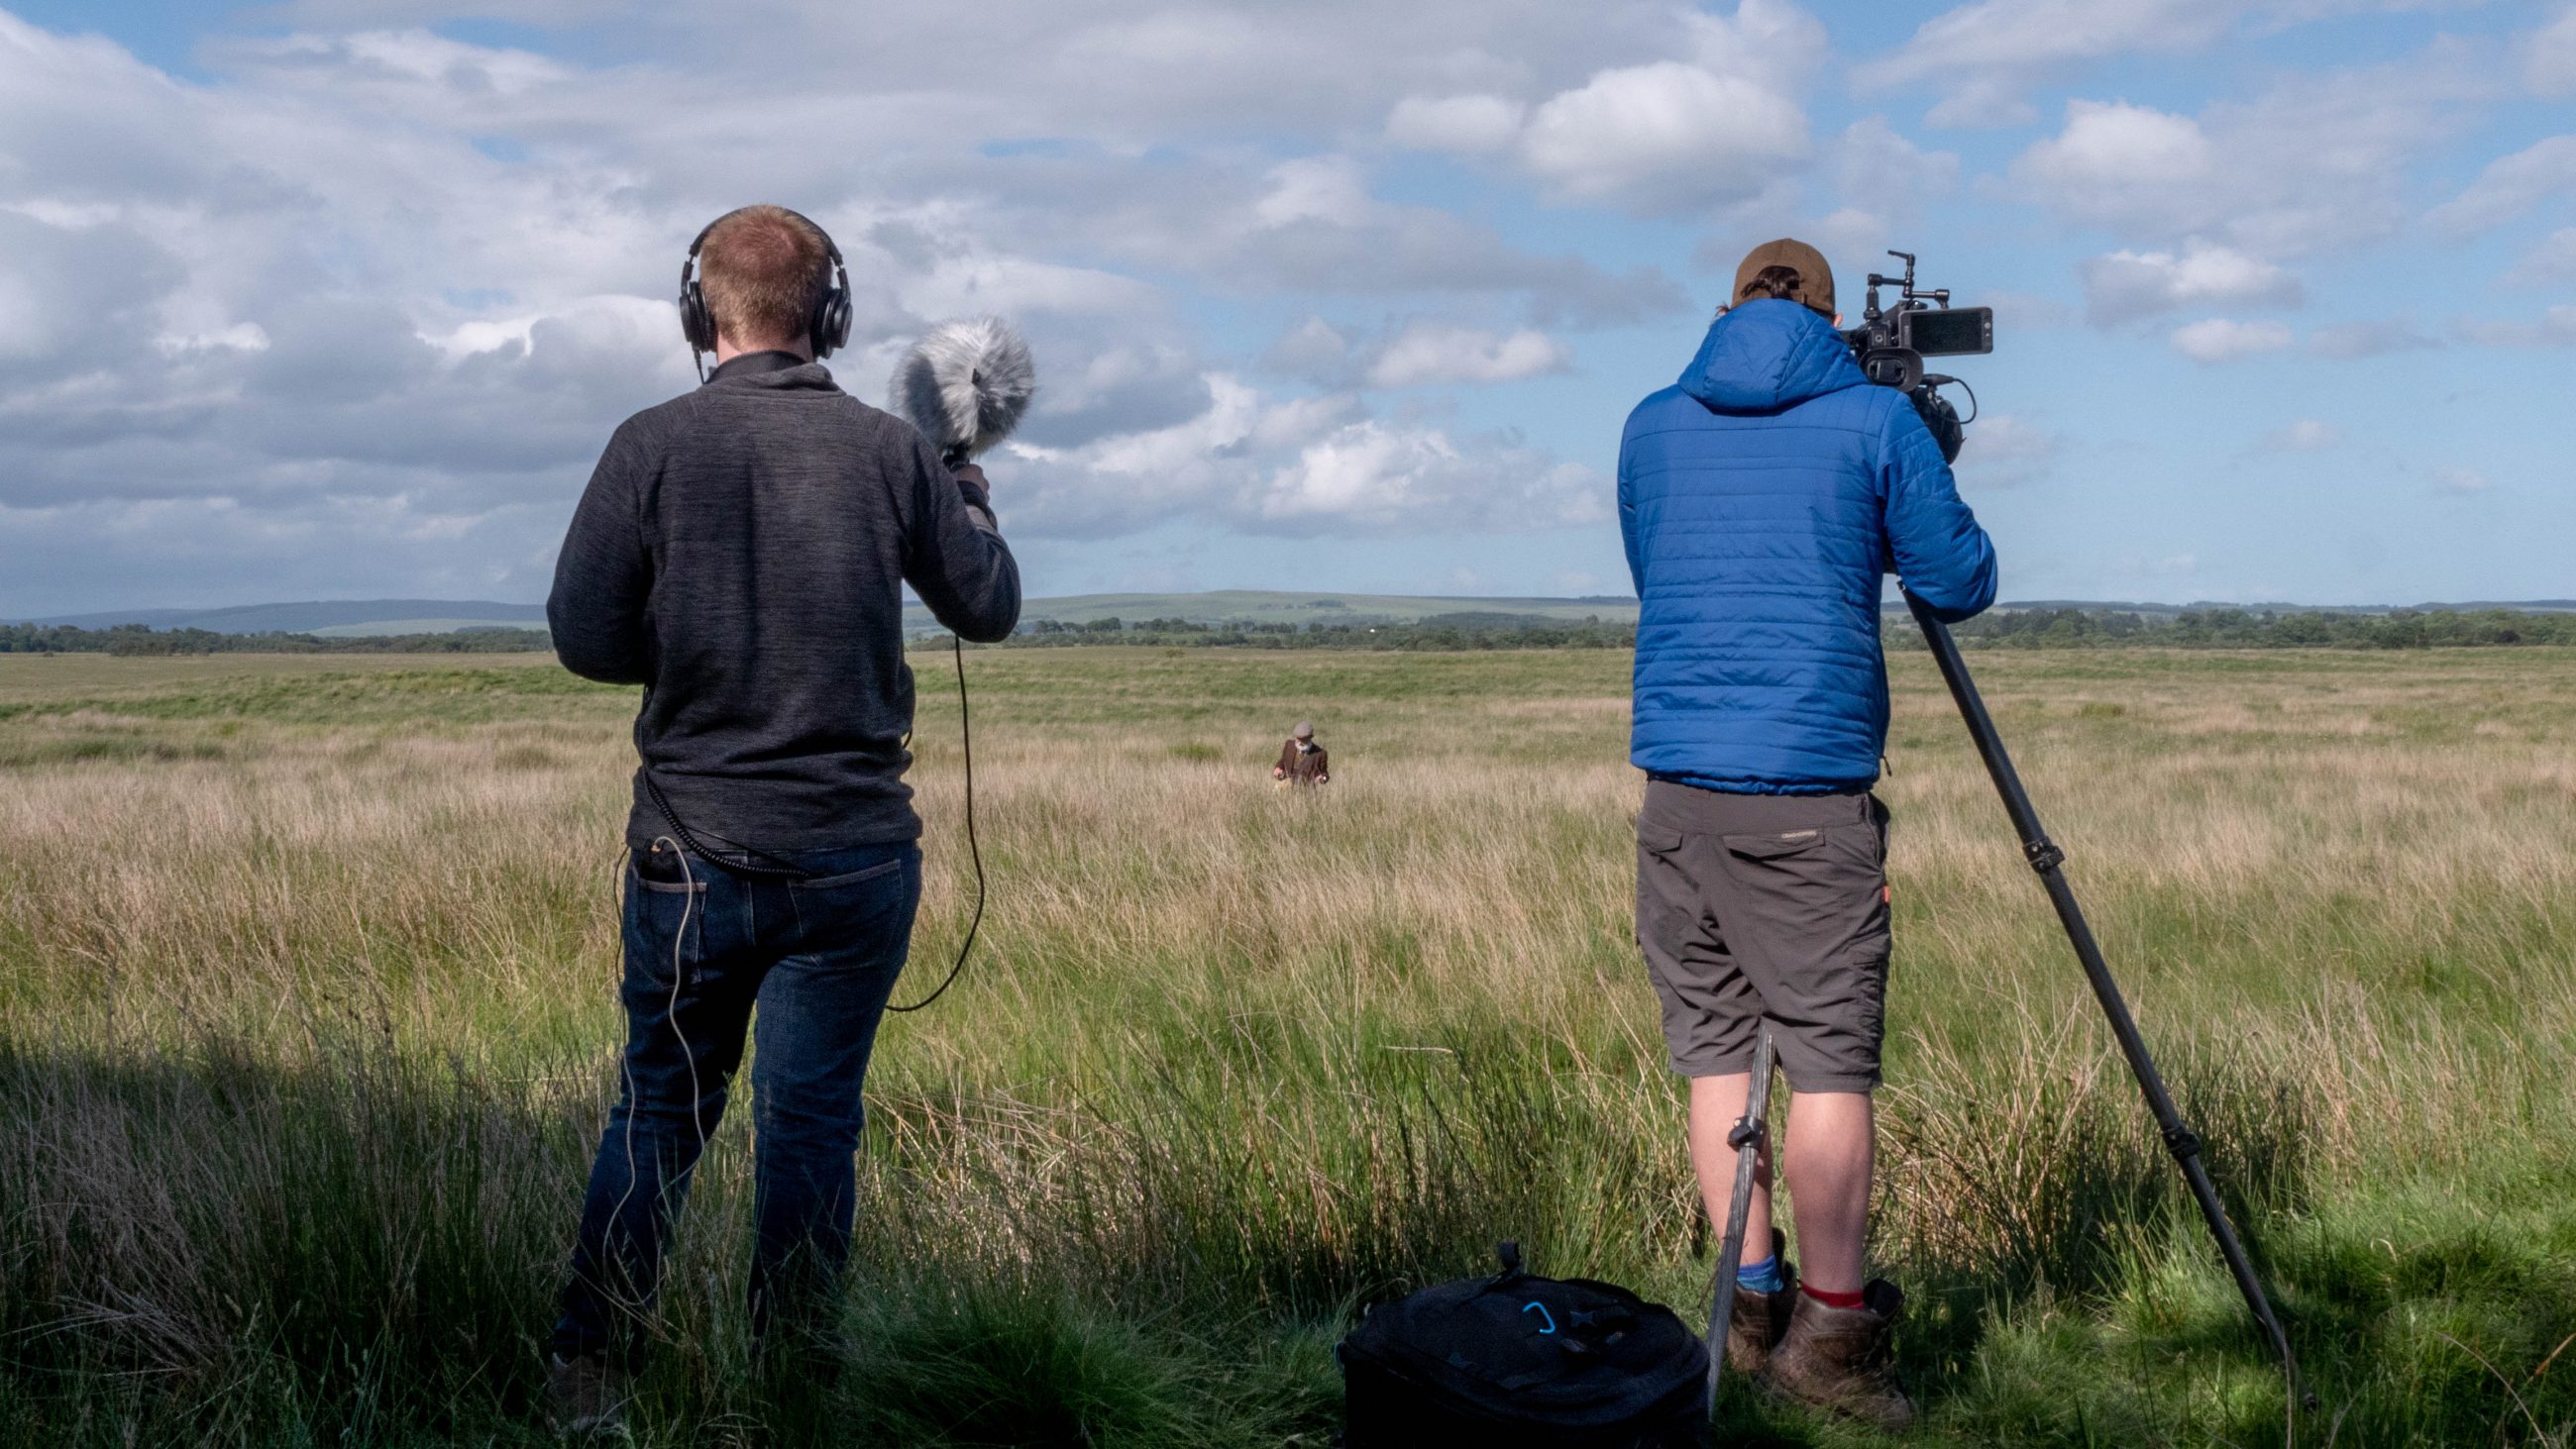 Filming in more fields with Melvyn Rawlinson, Peter Baumann (Sound Recordist) and Benjamin Sadd (Director of Photography) - Behind the Scenes of Carbon Farmer